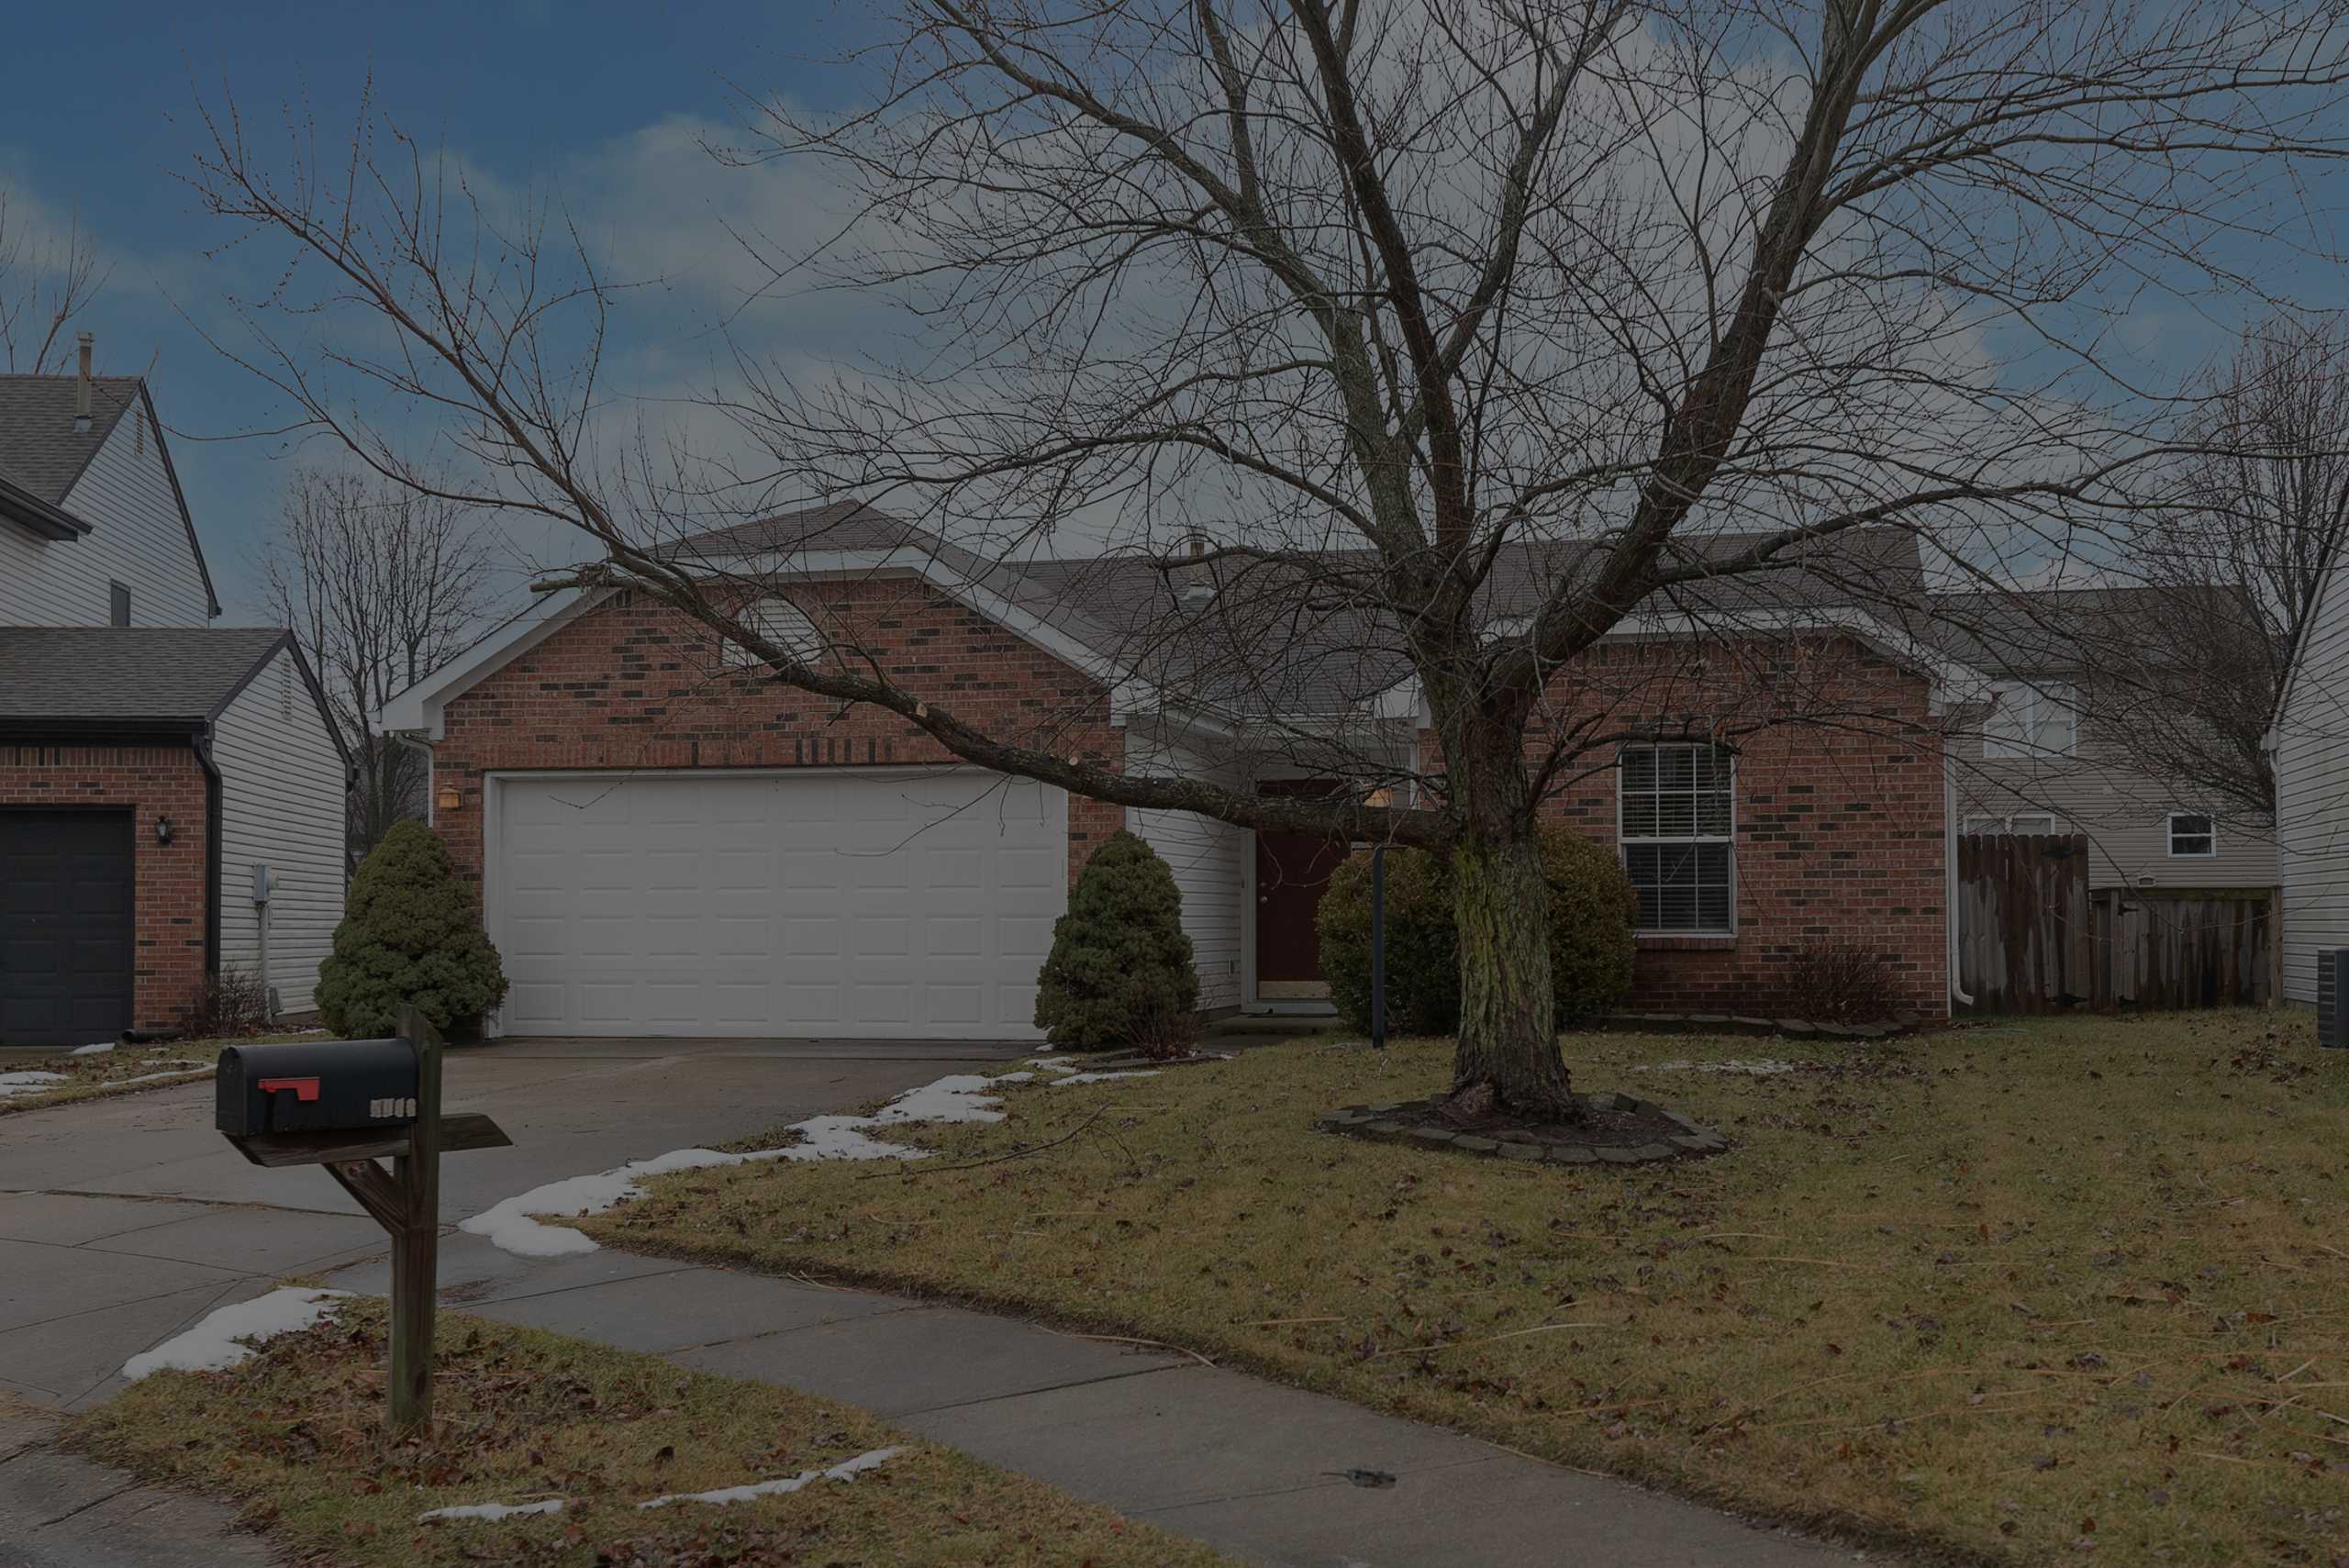 PENDING! IN INDIANAPOLIS-UPDATE RANCH CLOSE TO THOMPSON PARK